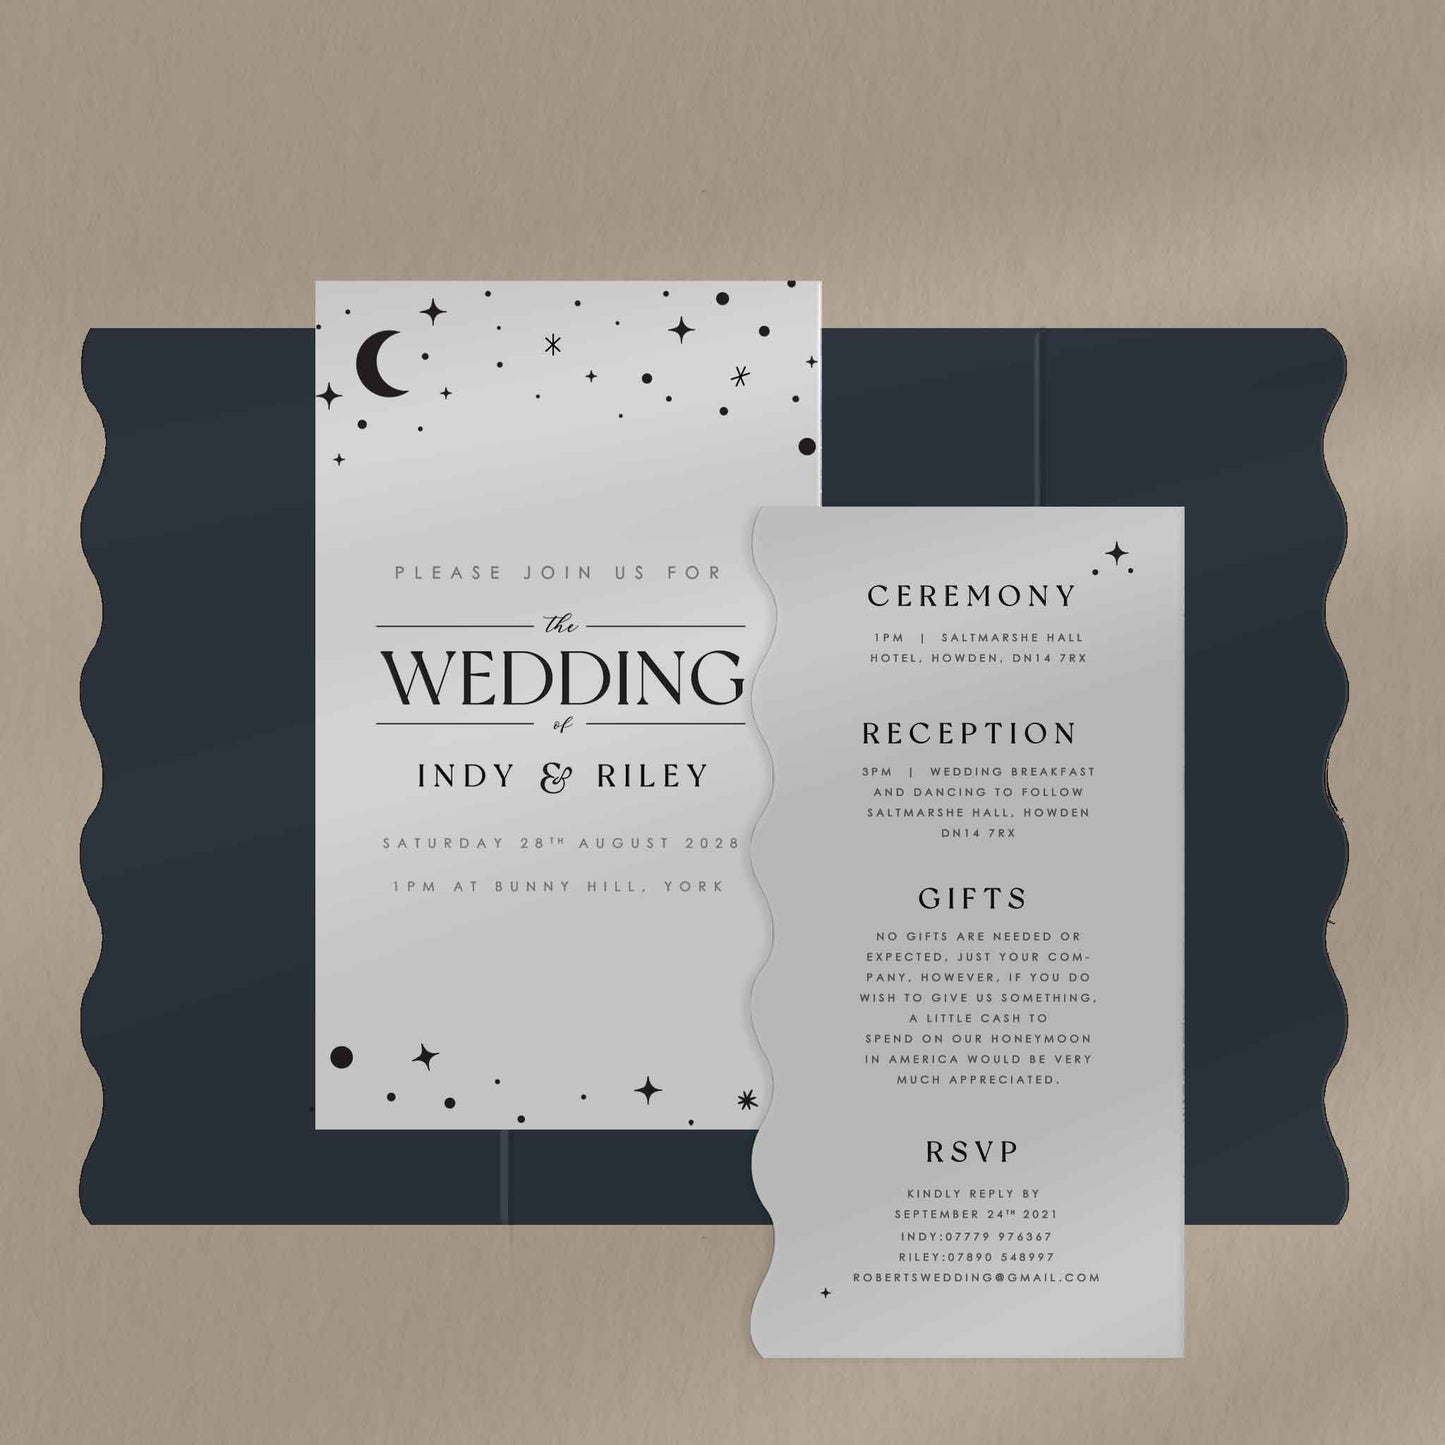 Scallop Envelope Sample  Ivy and Gold Wedding Stationery Indy  